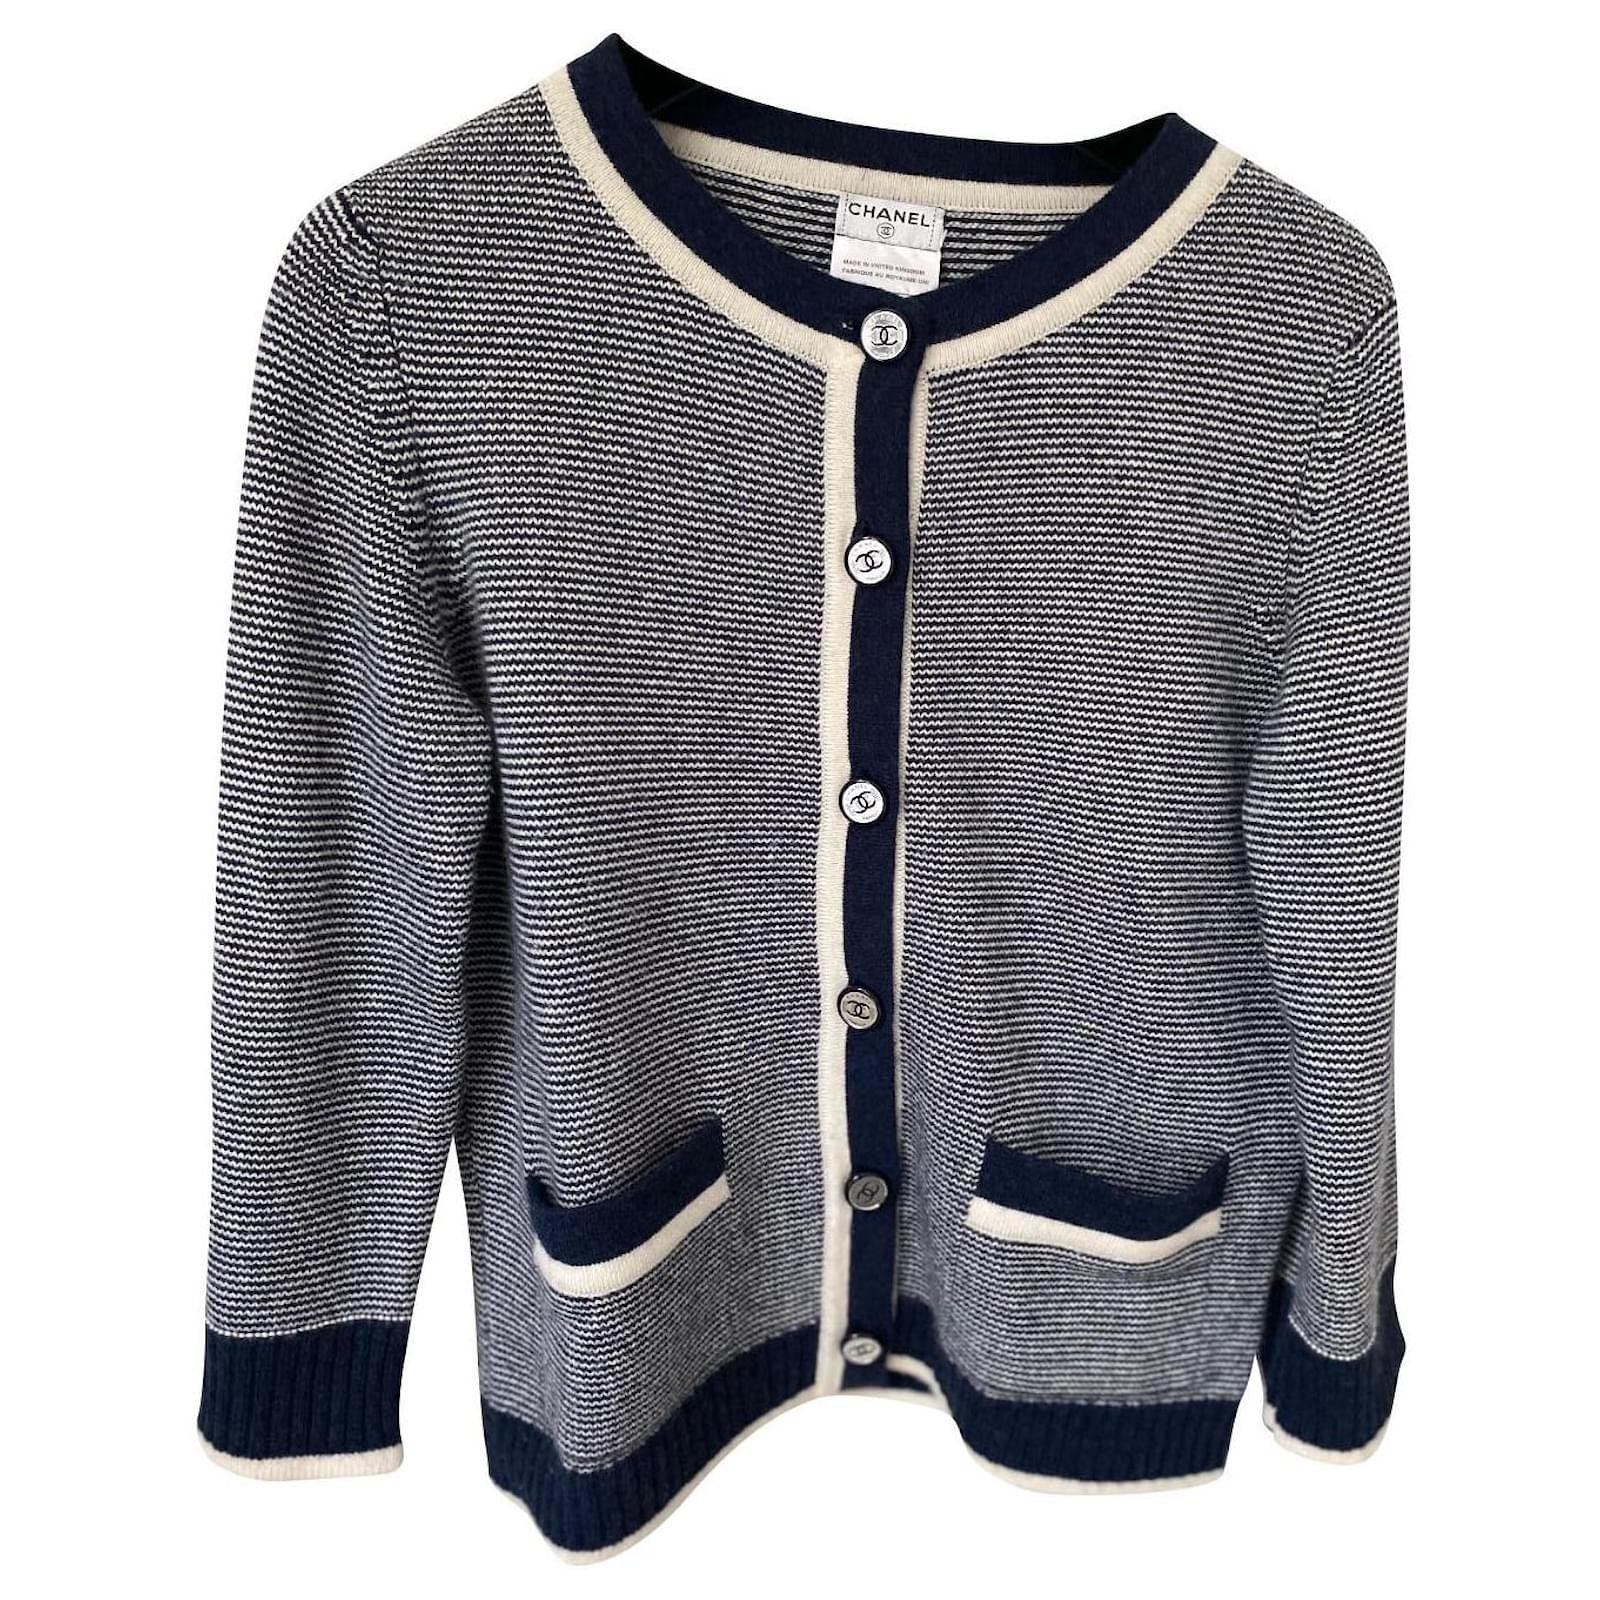 Chanel Striped Cashmere Cardigan with Contrast Trim.jpg